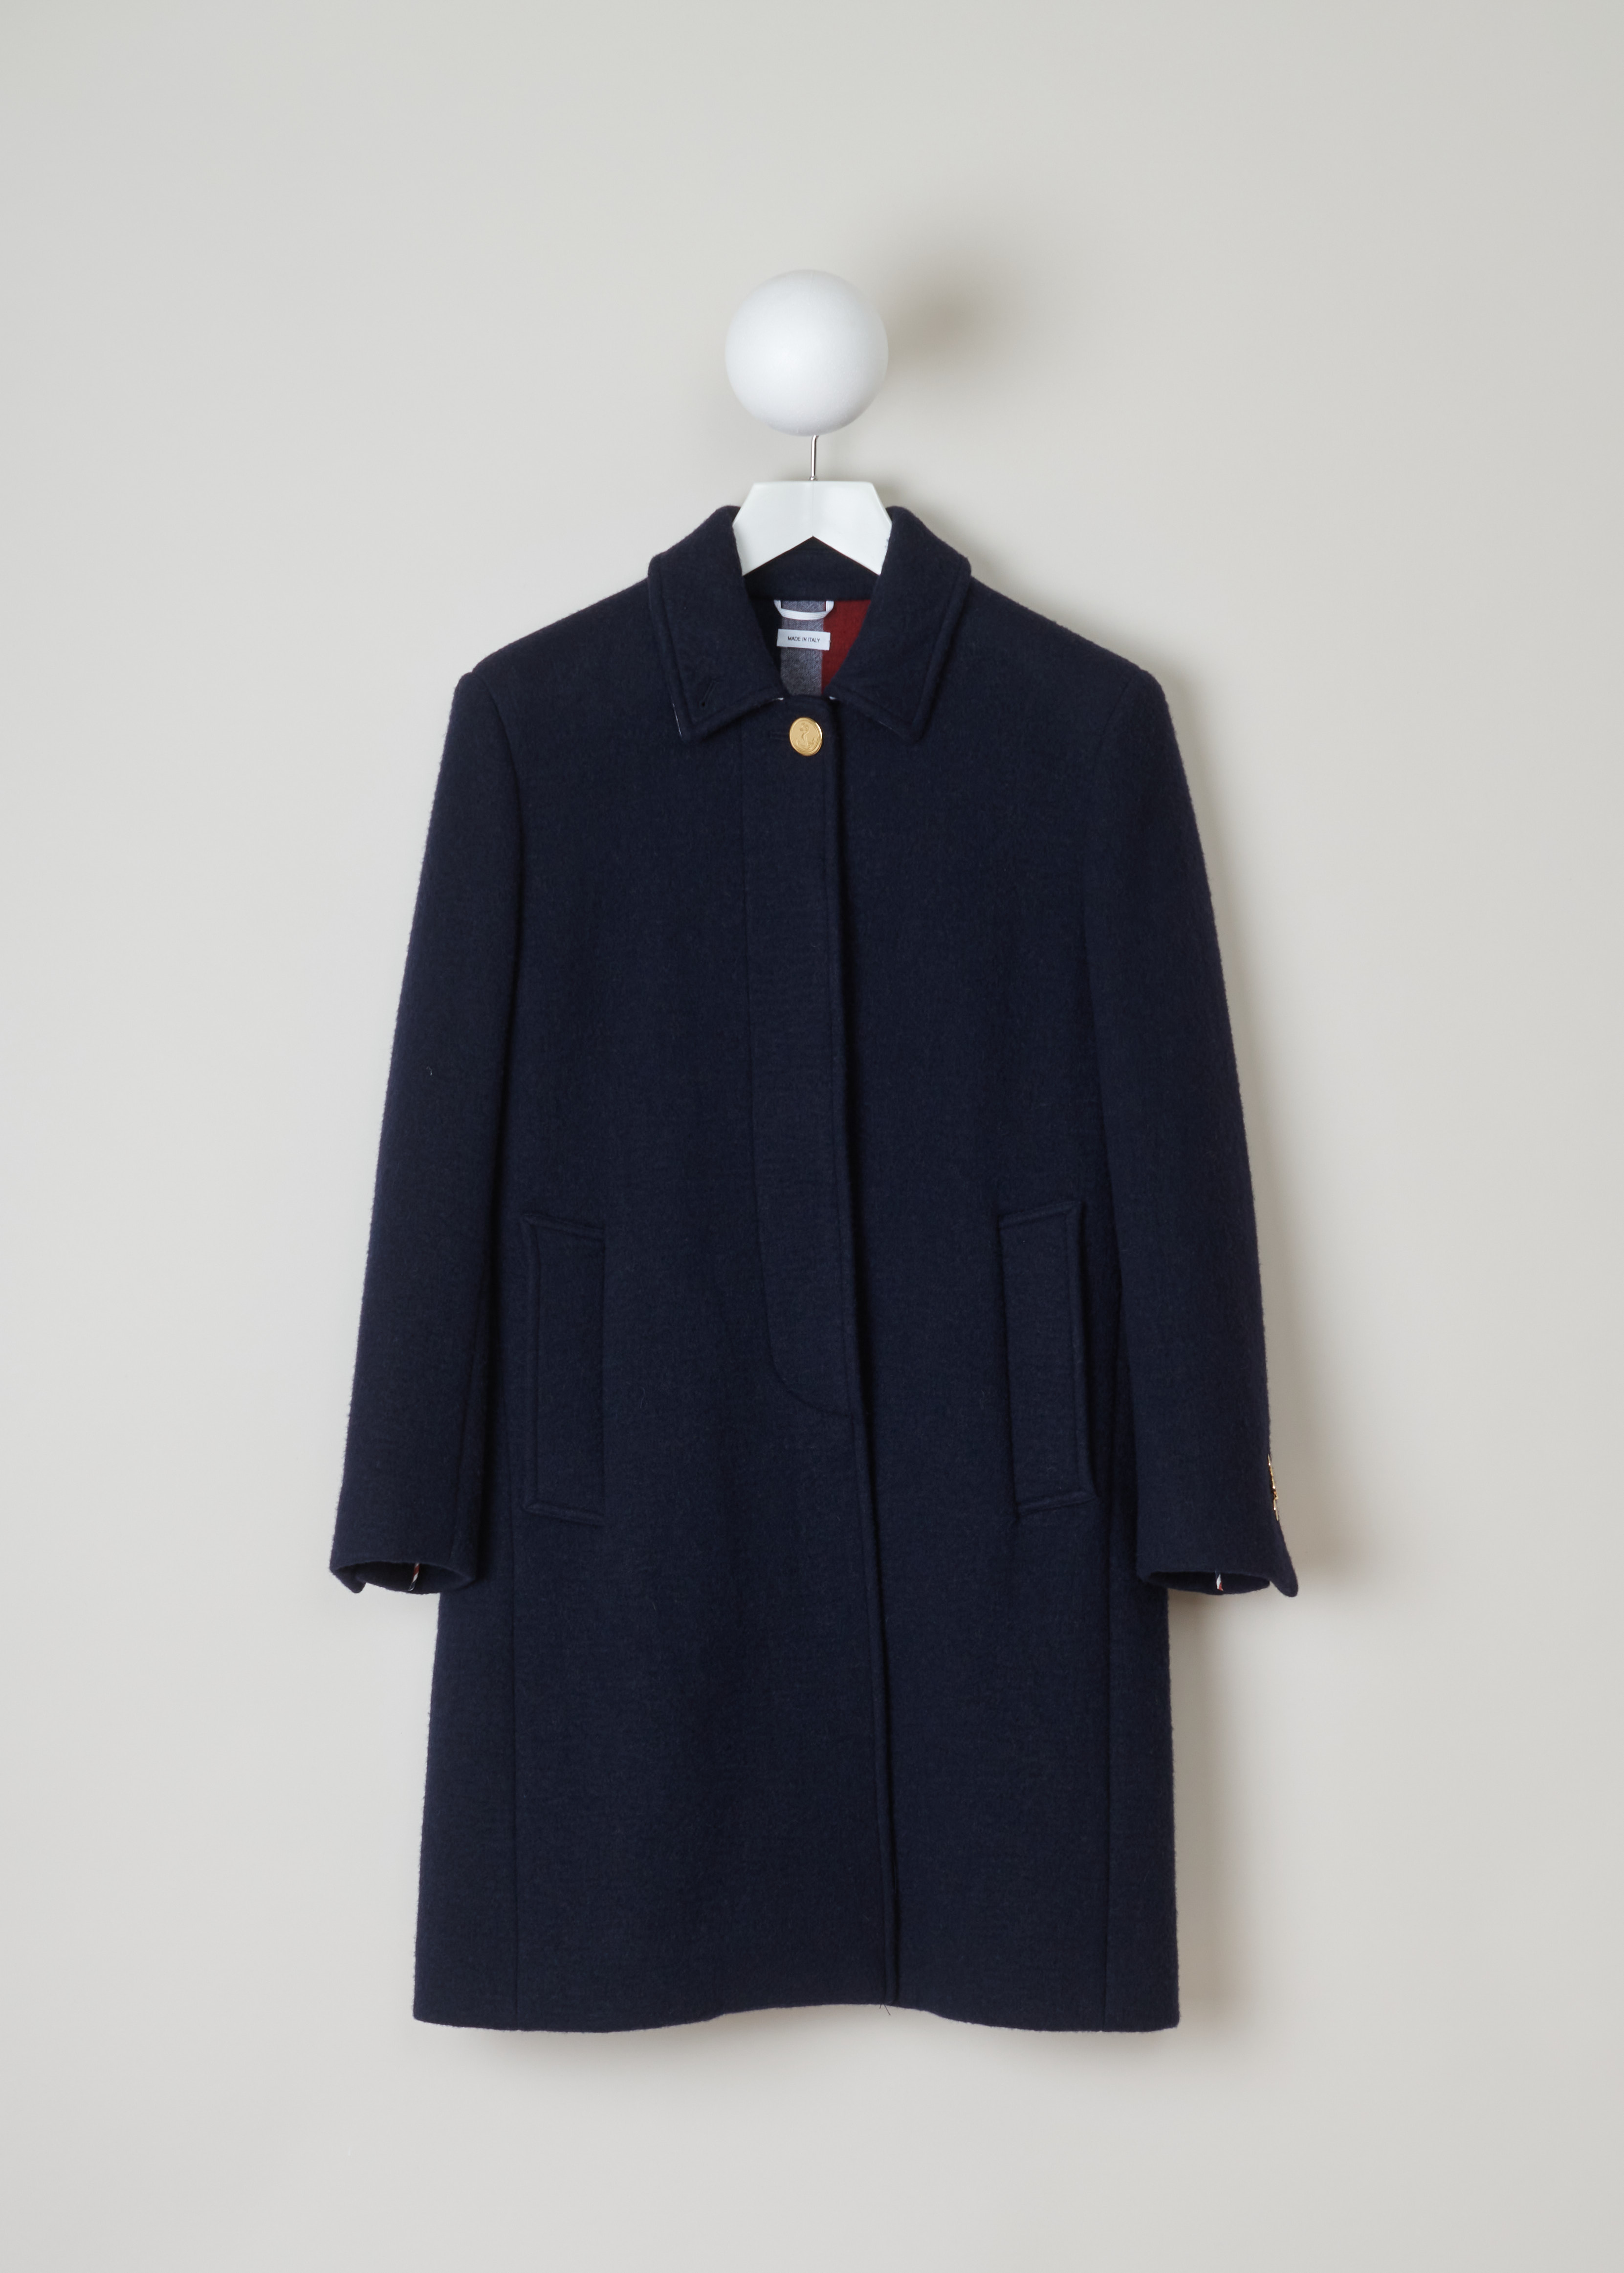 Thom Browne Navy woolen A-line coat FOC411C_03564_415_Navy front. Wool and cashmere blend coat in a classic silhouet with the iconic Thom Browne stripes on the back, a squared collar, concealed button fastening with one visible gold button and two side pockets.